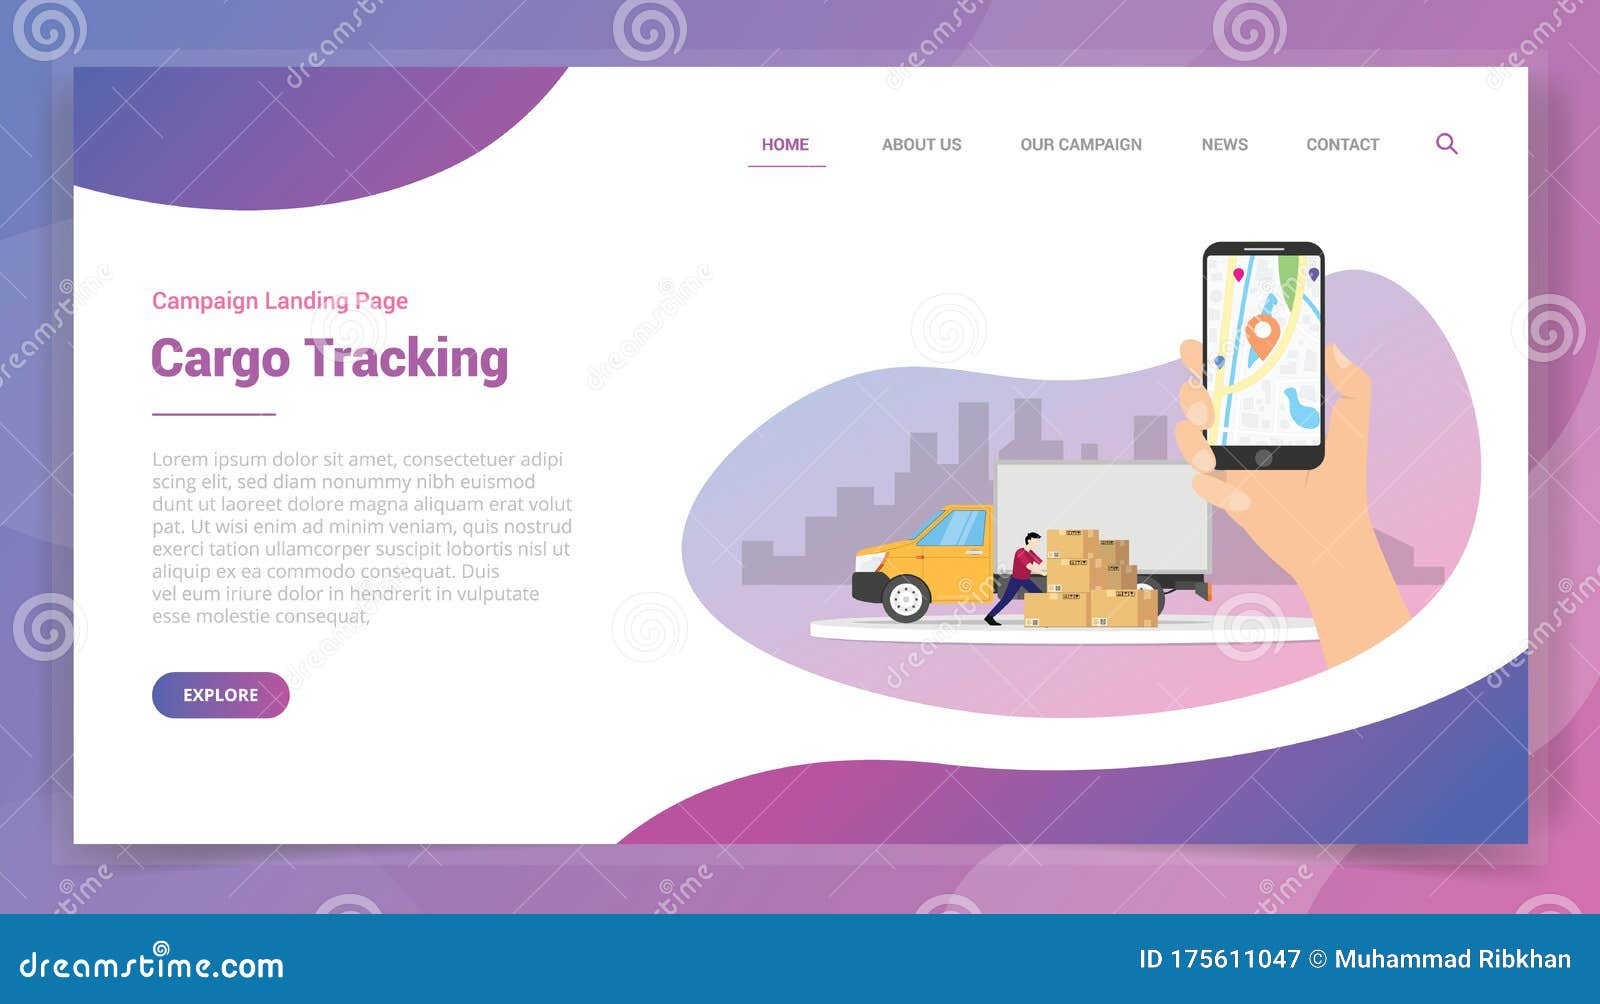 Online Cargo Tracking For Website Template Or Landing Homepage Design Campaign Stock Illustration Illustration Of Landing Campaign 175611047